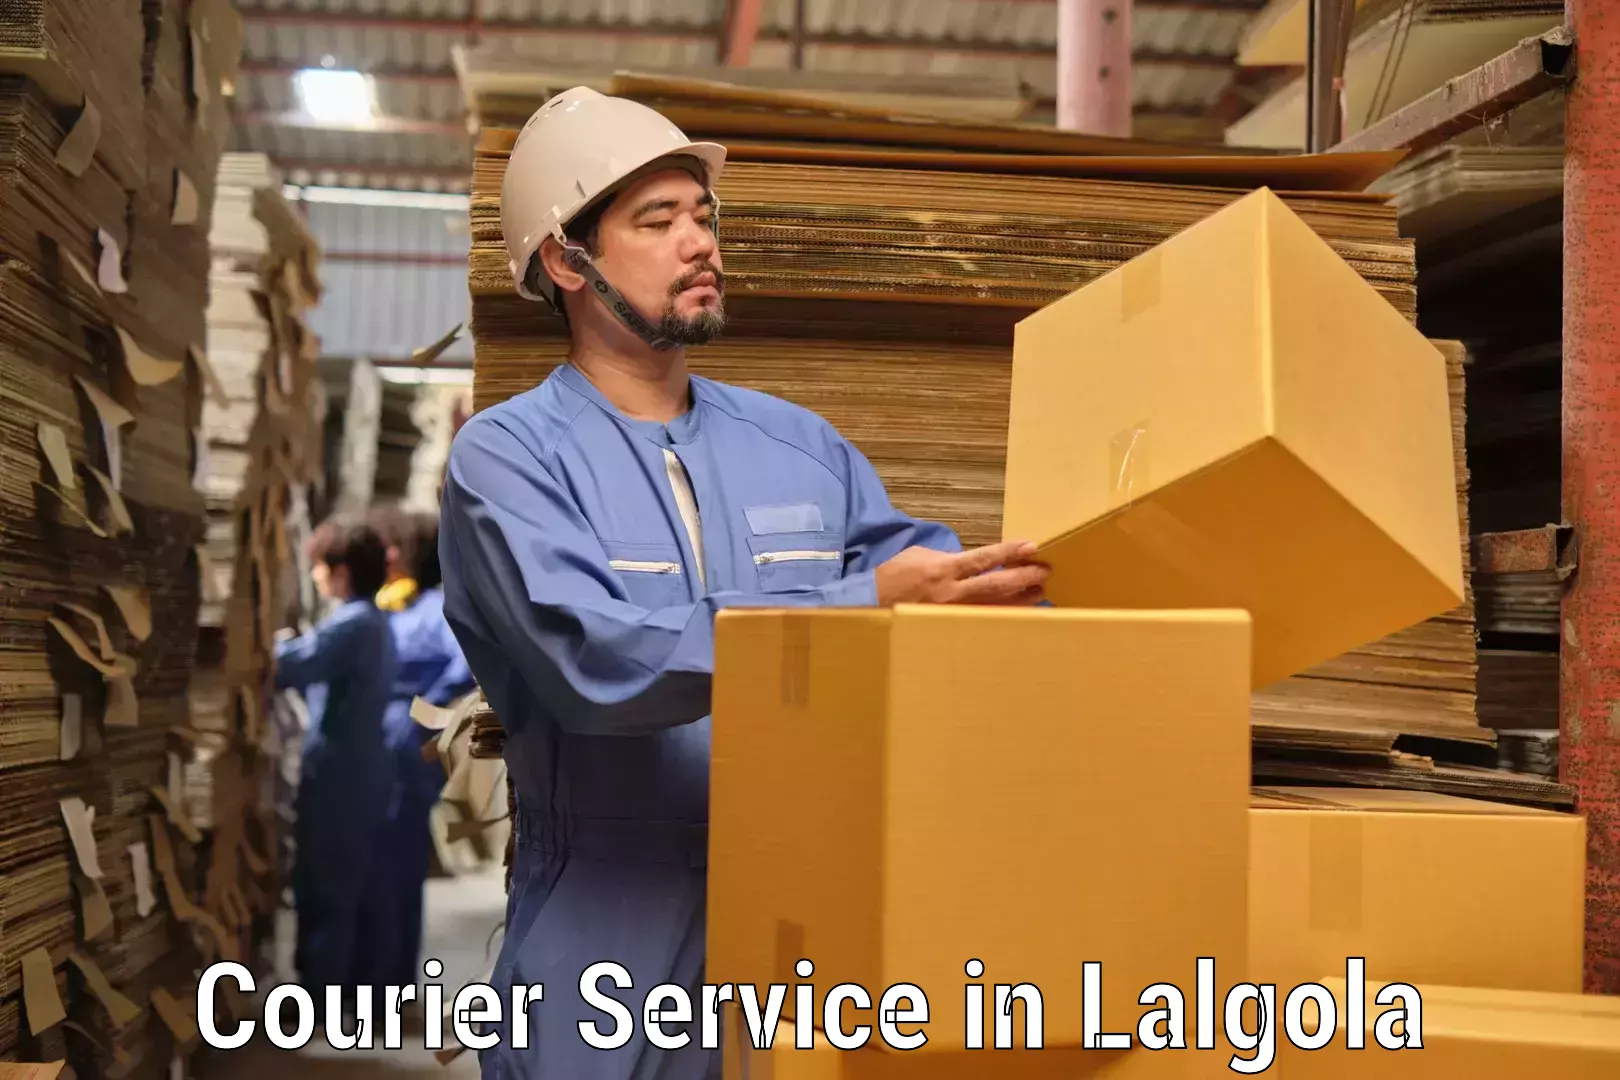 Customer-centric shipping in Lalgola